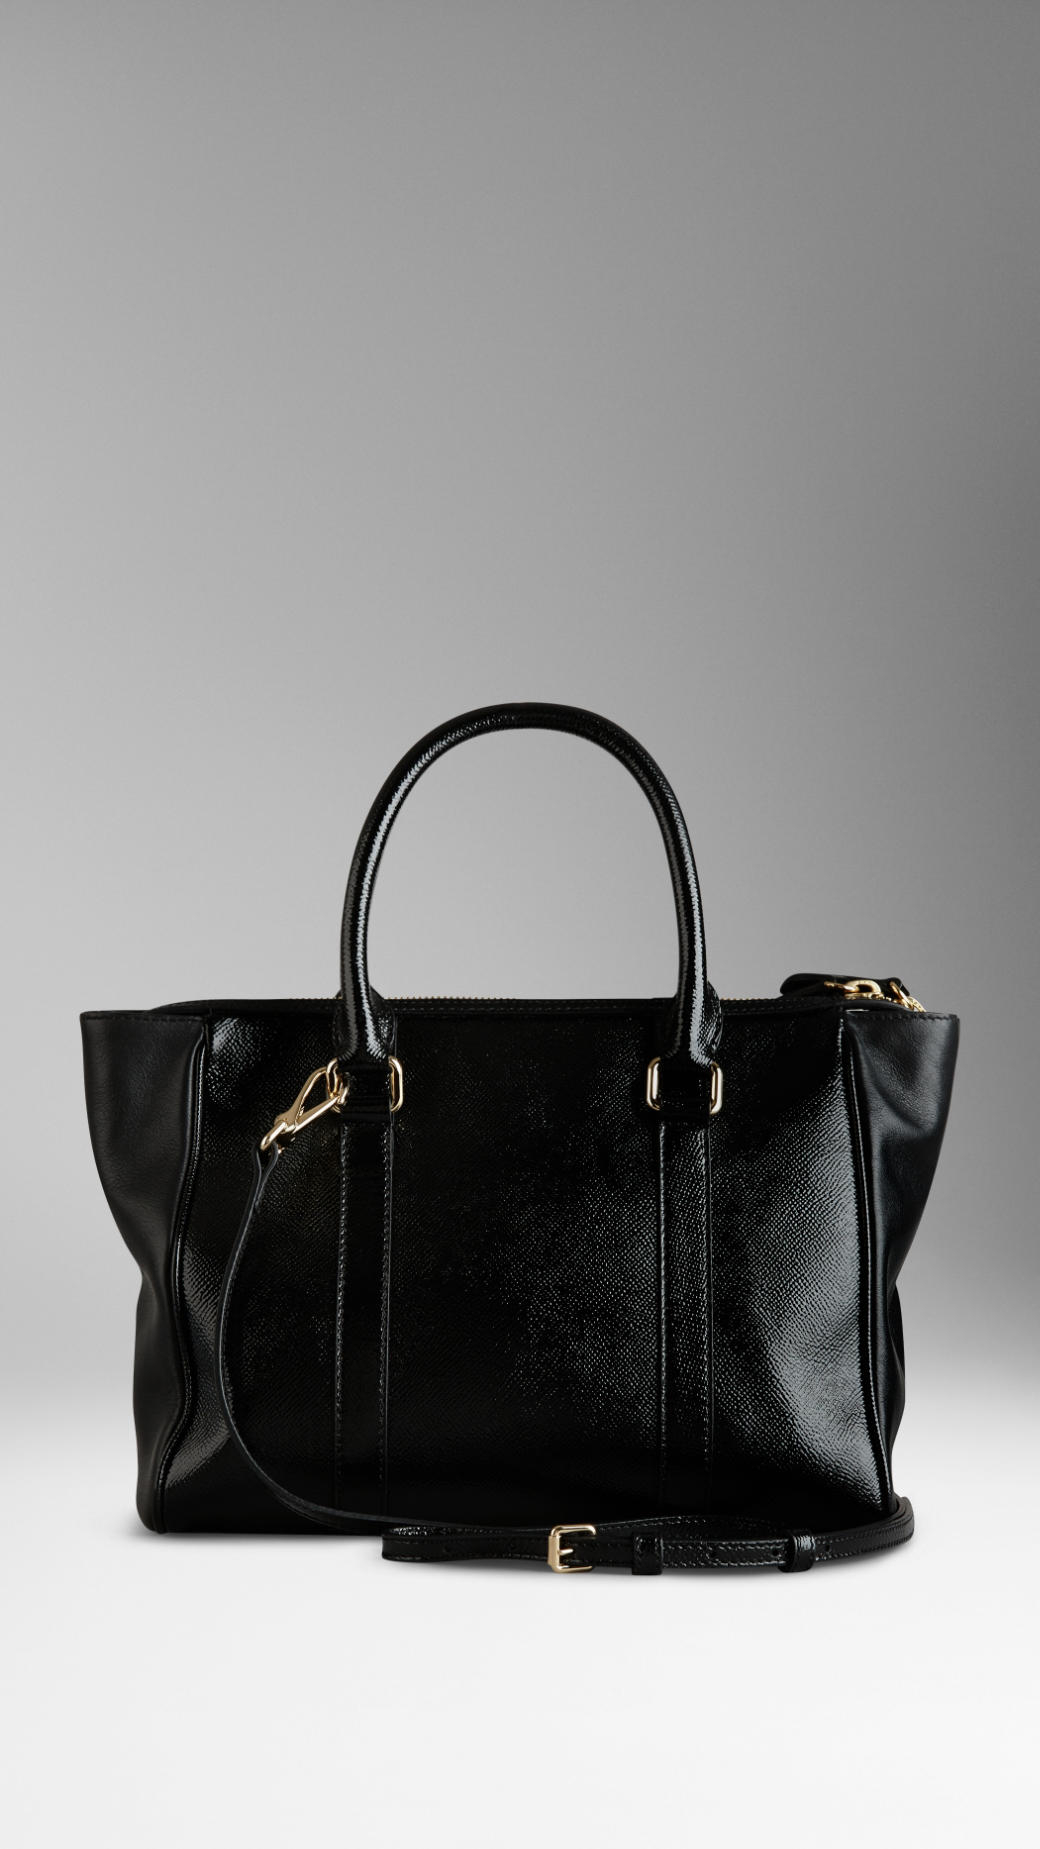 Burberry Medium Patent London Leather Tote Bag in Black | Lyst